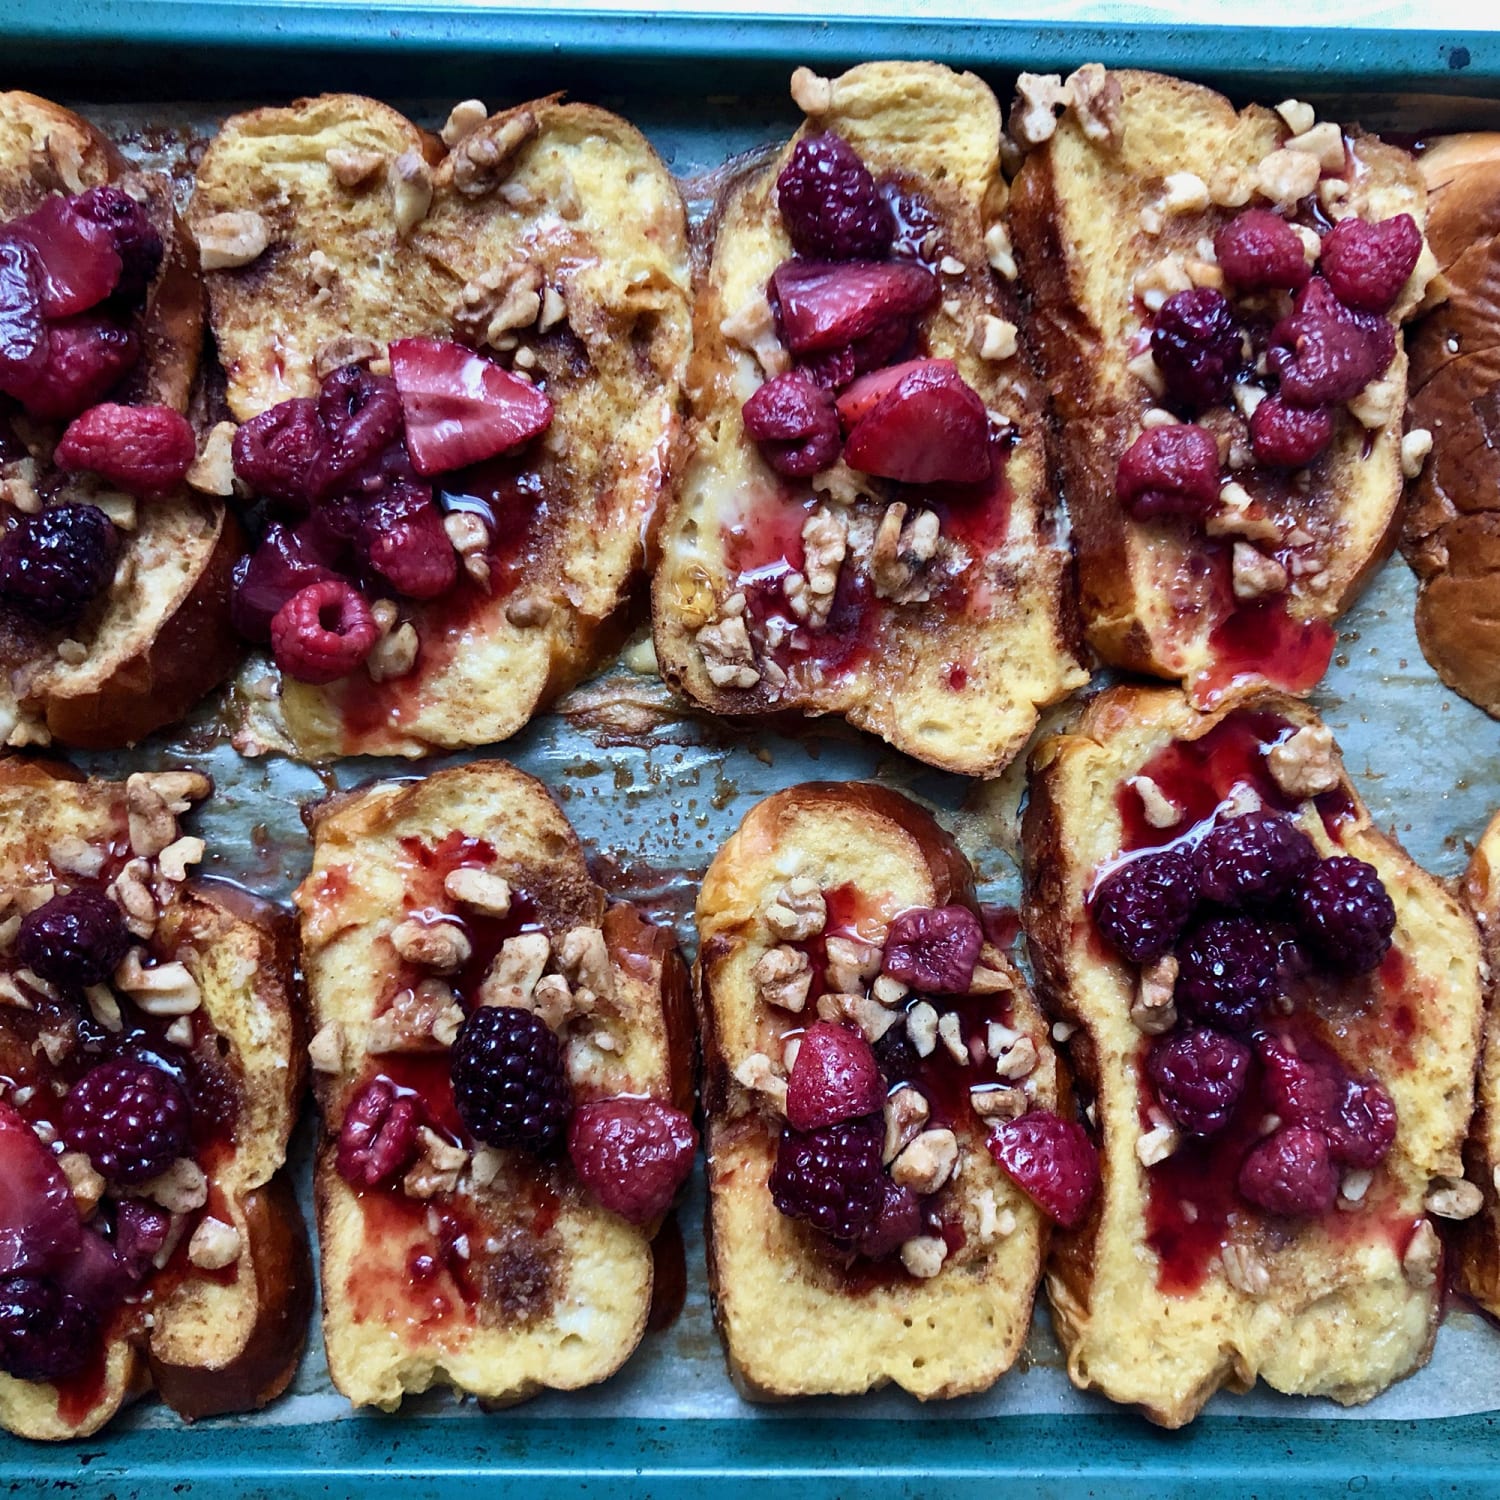 Sheet Pan French Toast • Now Cook This!